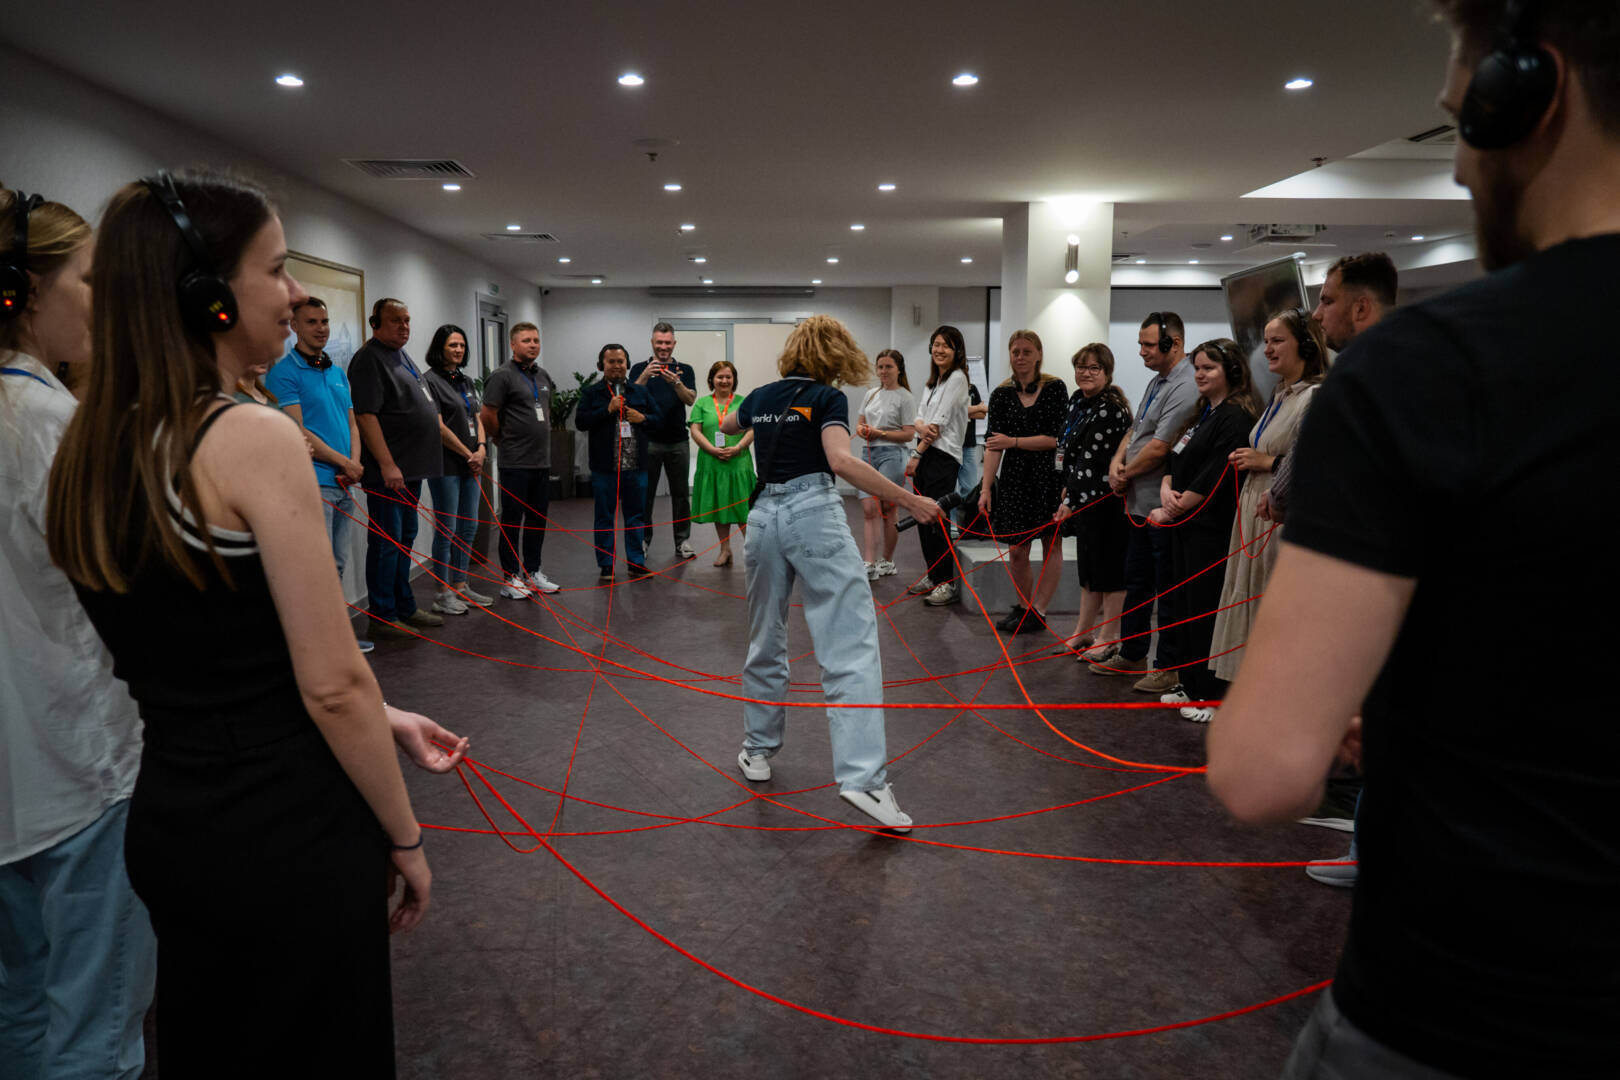 A group of people stand in a large circle, each holding on to a long strand of red yarn forming a web across the circle. One woman, wearing a World Vision shirt, stands in the center holding the yarn.